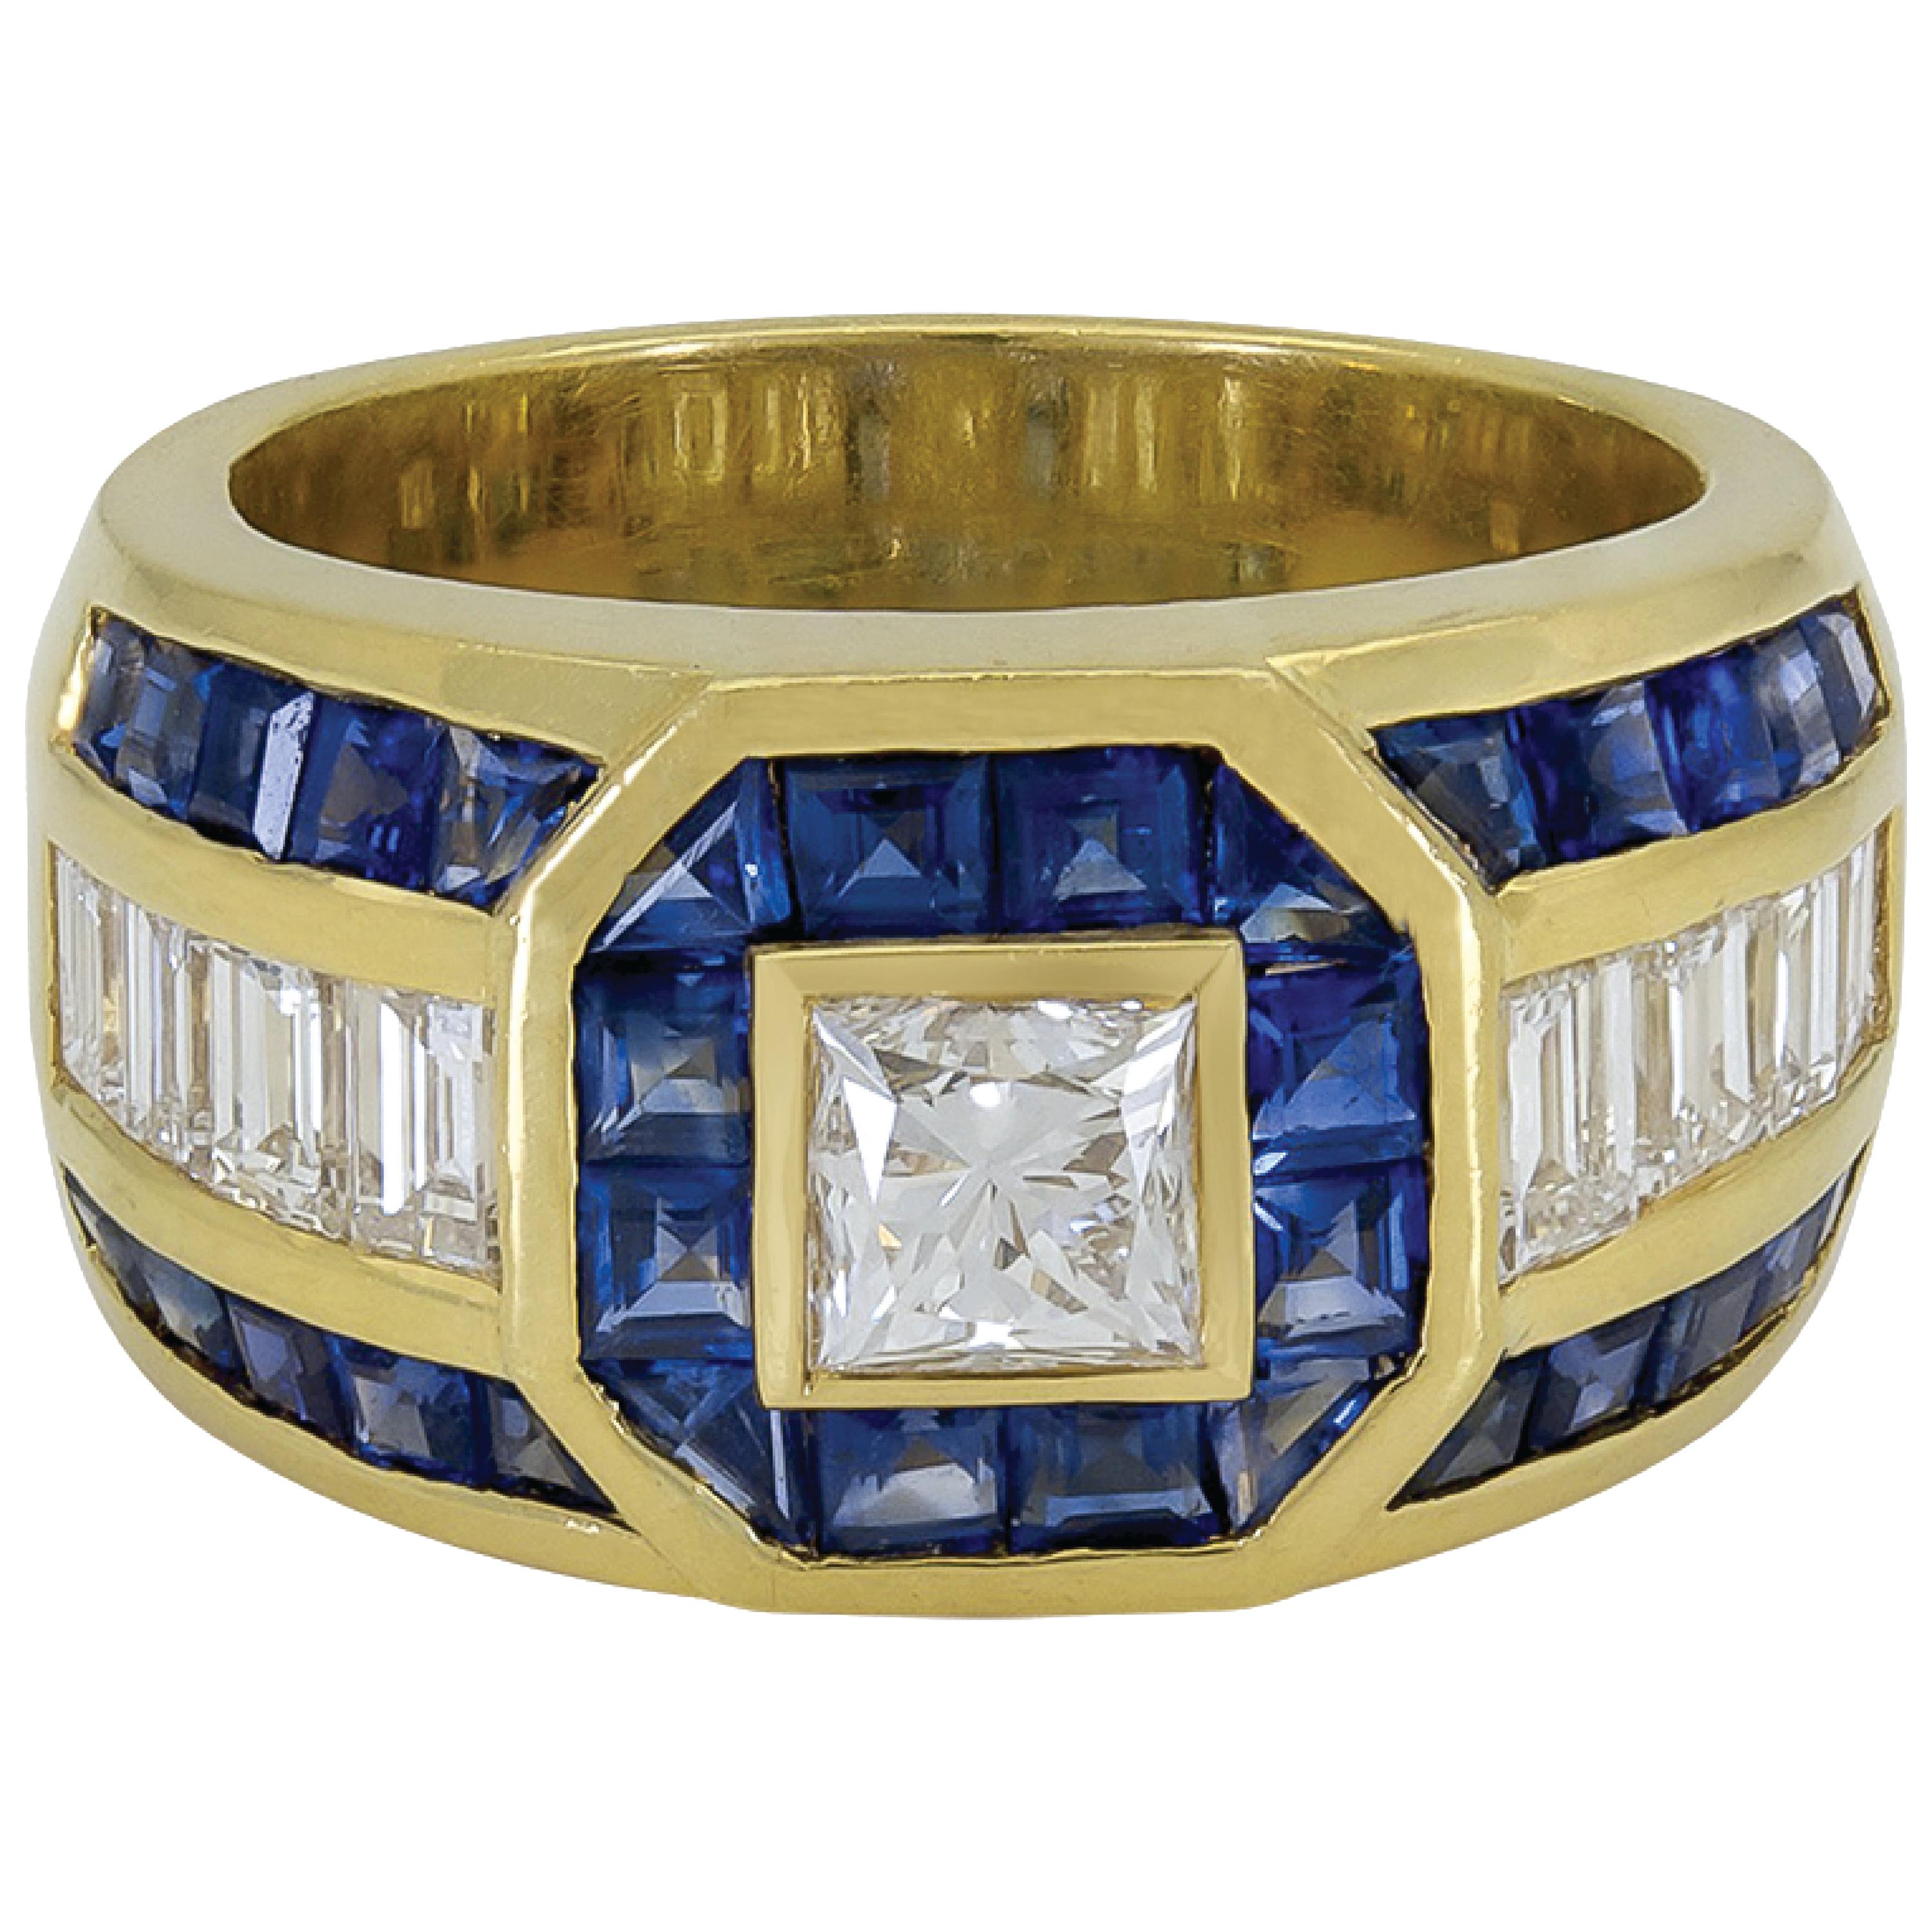 Sophia D. 0.64 Carat Diamond Center with Blue Sapphires Dome Ring in Yellow Gold